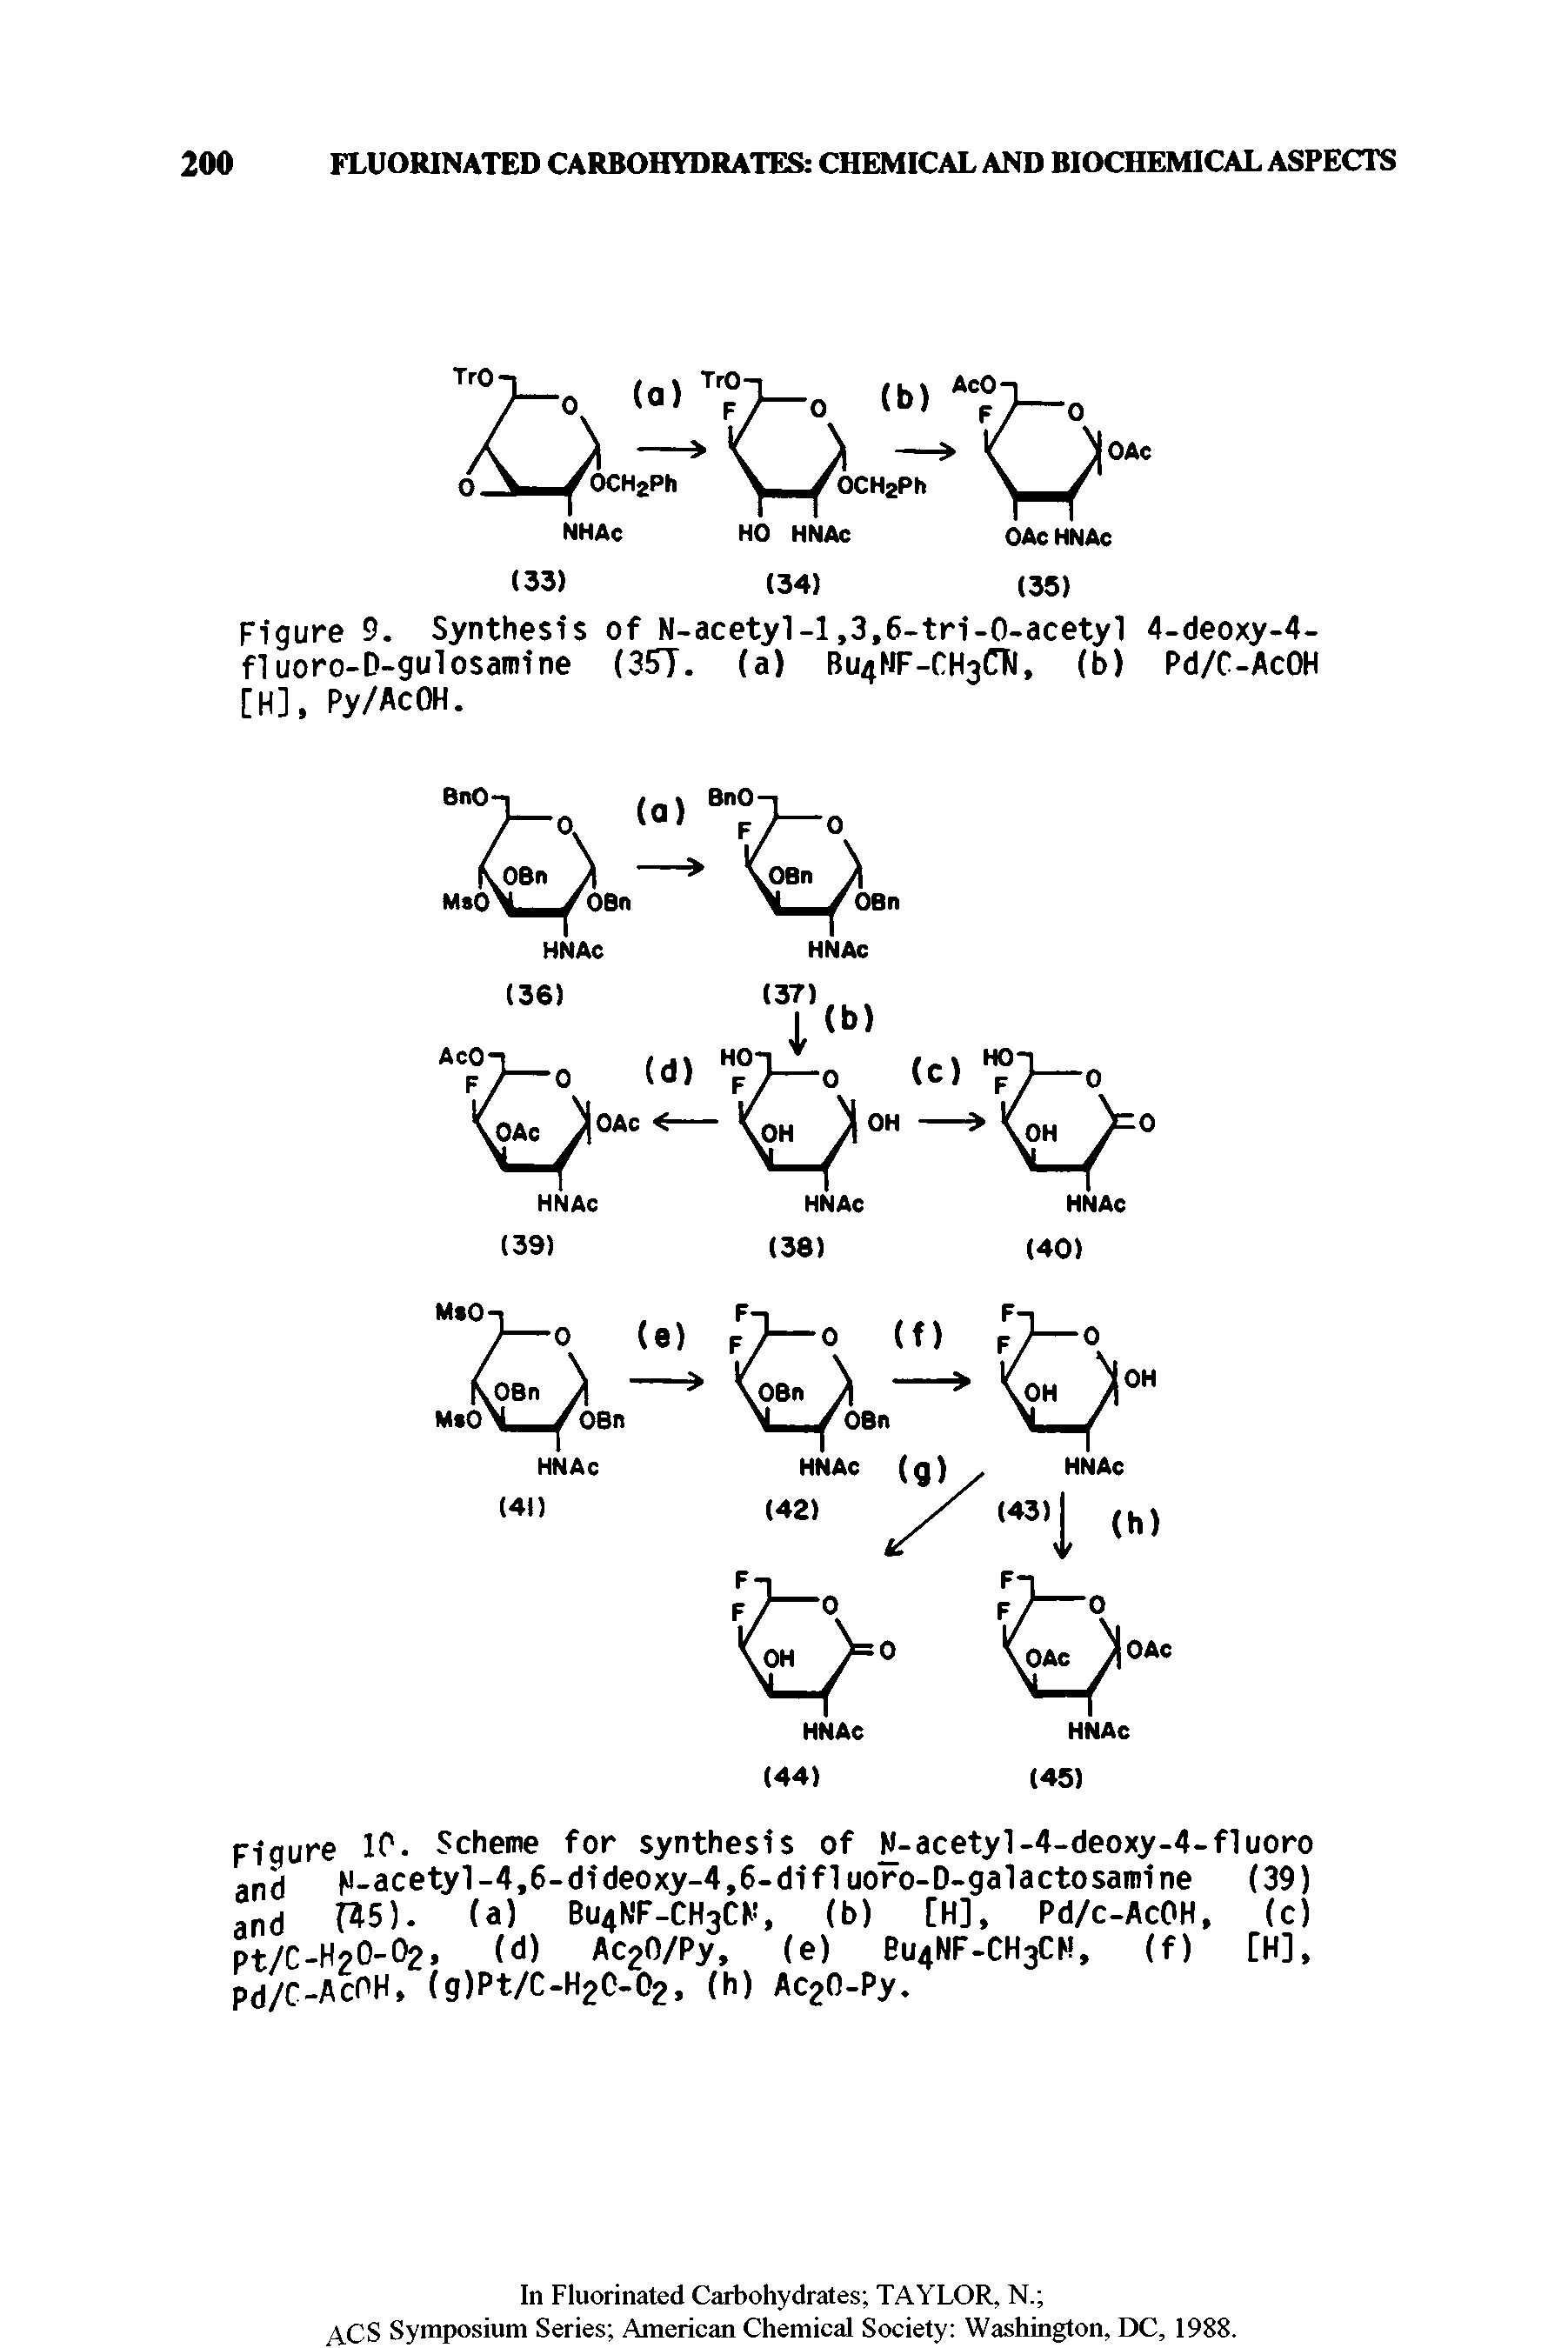 Figure 9. Synthesis of N-acety1-l,3,6-tri-O-acetyl 4-deoxy-4-fluoro-D-gulosamine (3ST. (a) Bu4)iF-CH3CM, (b) Pd/C-AcOH...